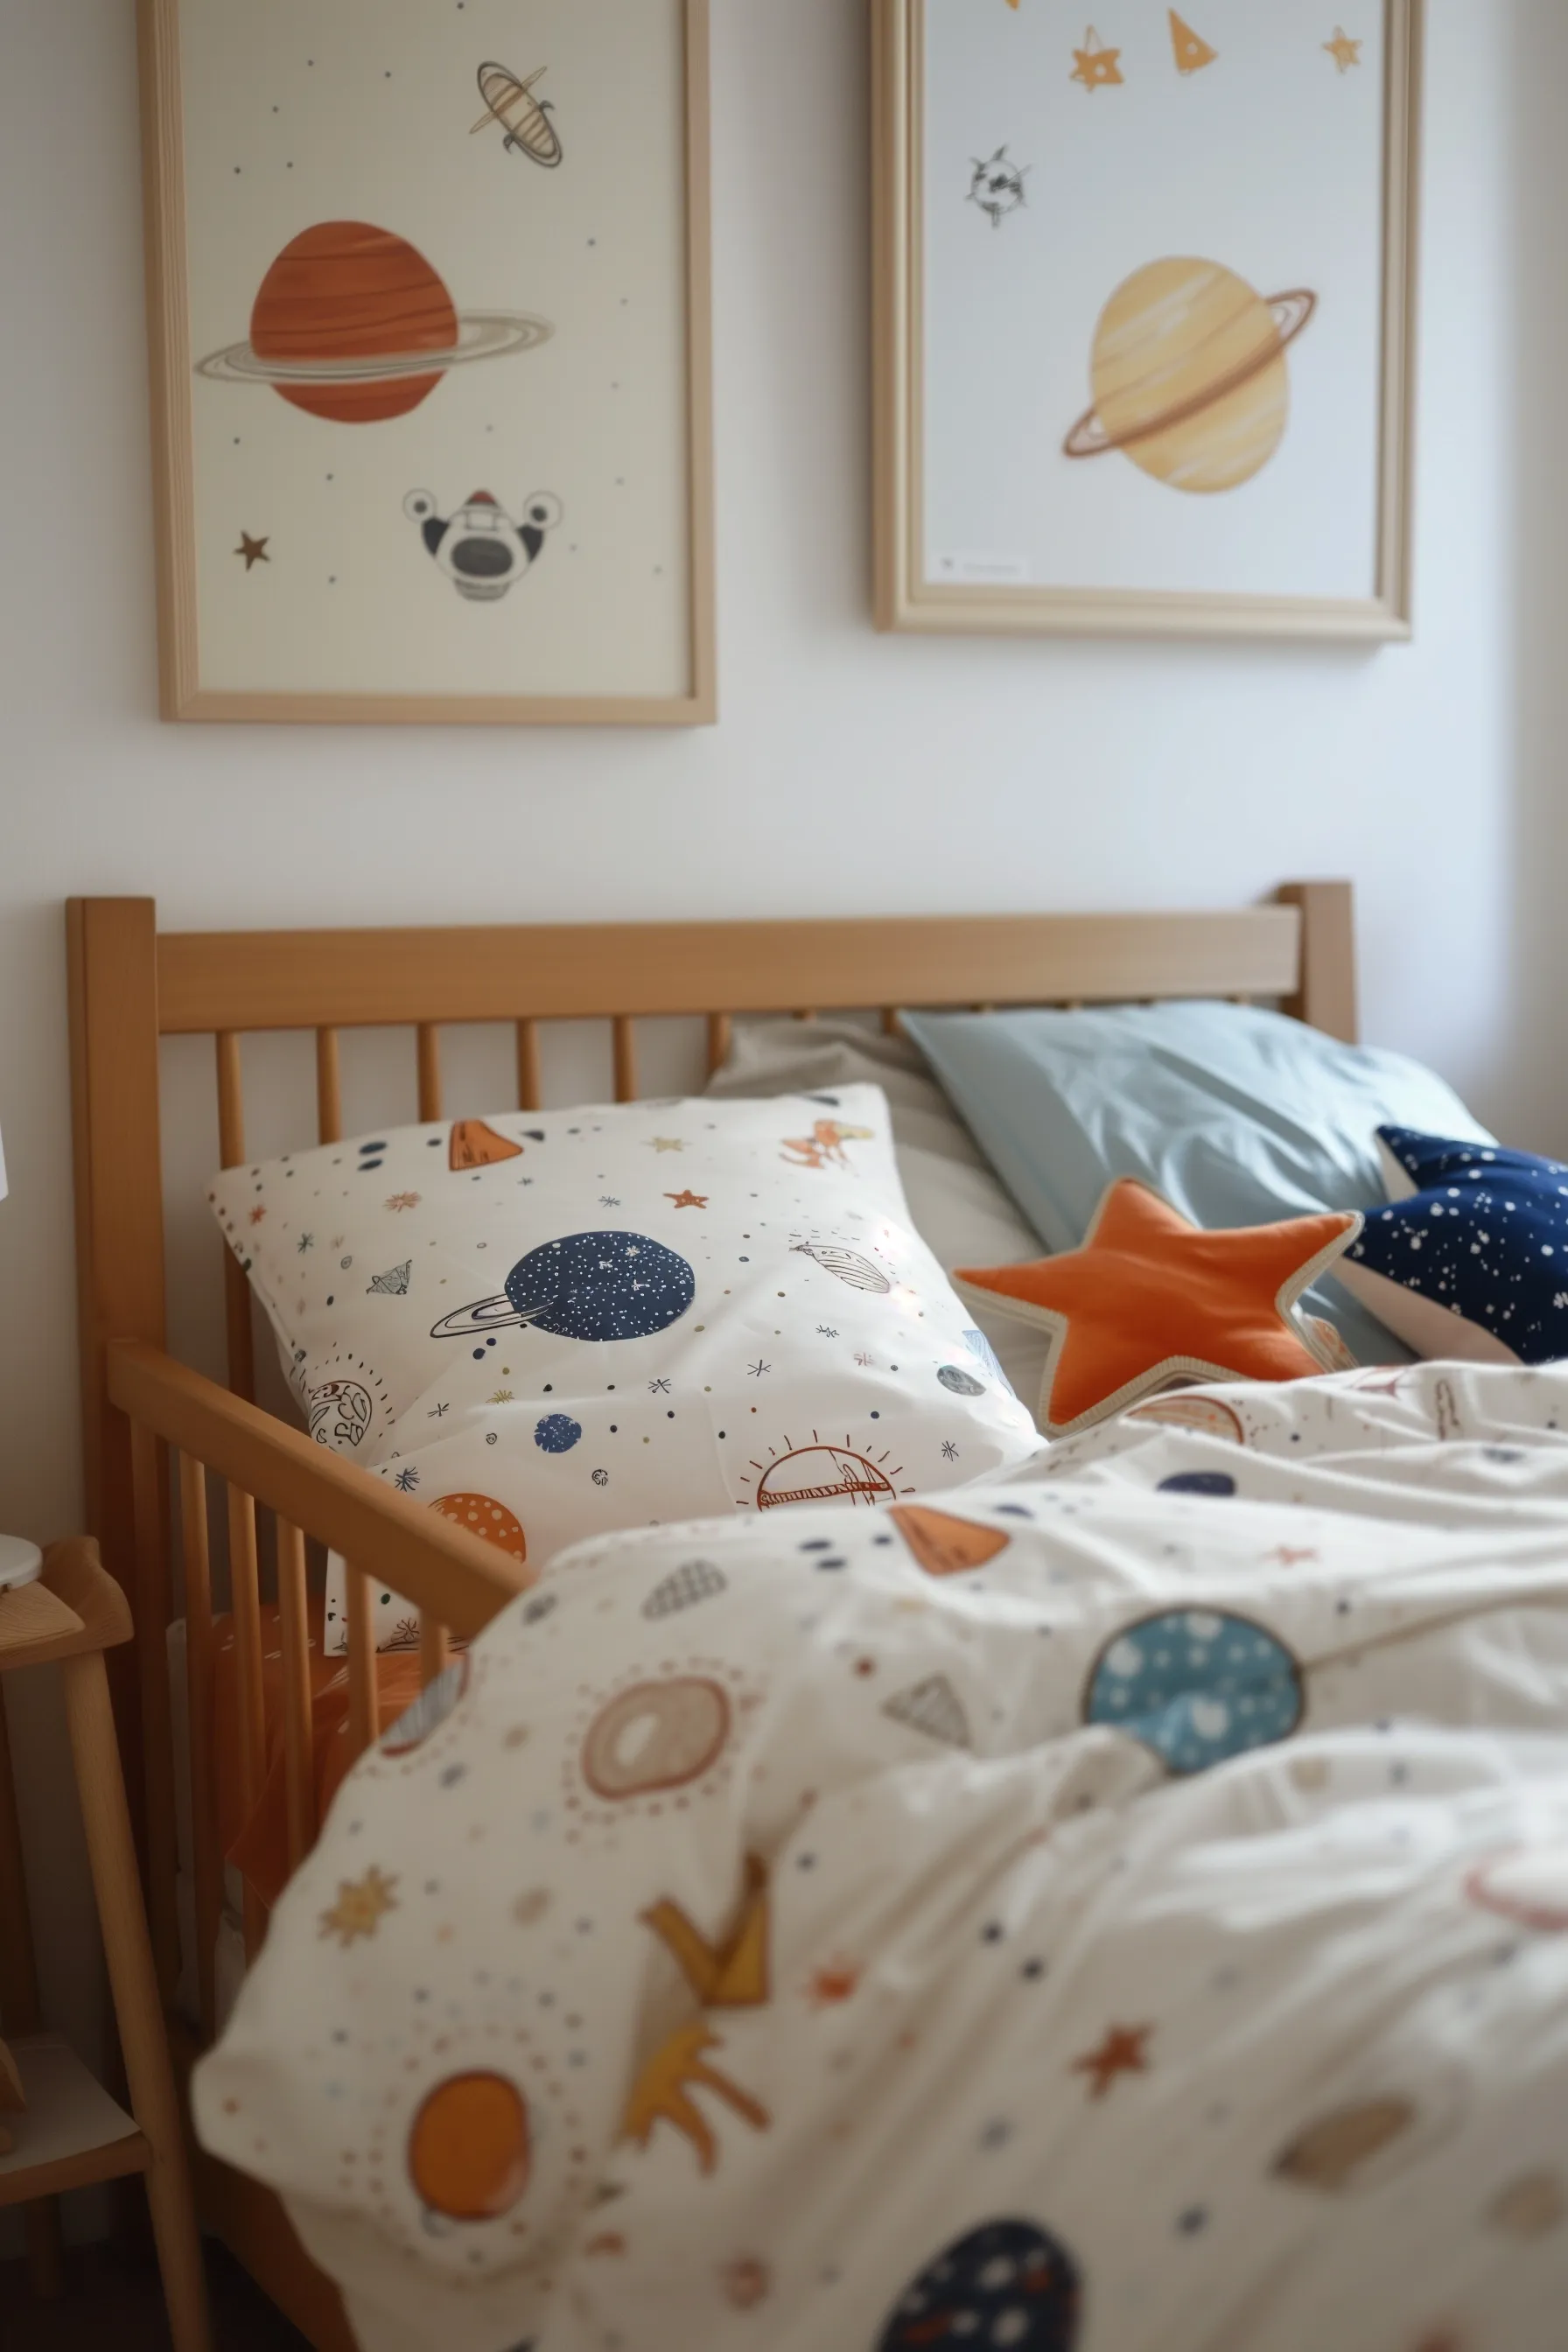 A space bedroom with space themed bedding